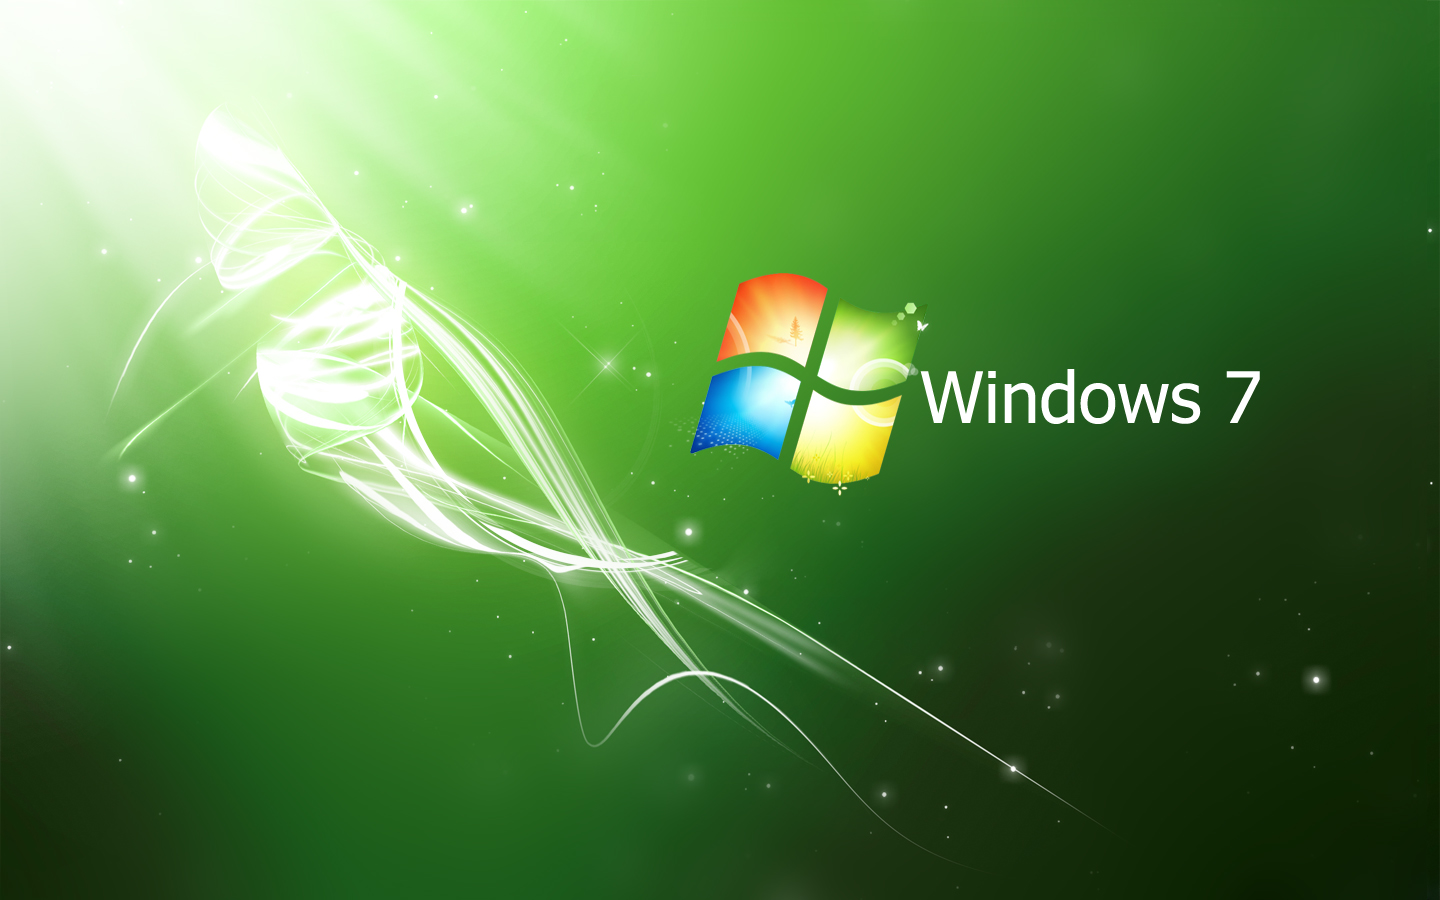 HD wallpaper for windows 7 Cool Background Wallpapers